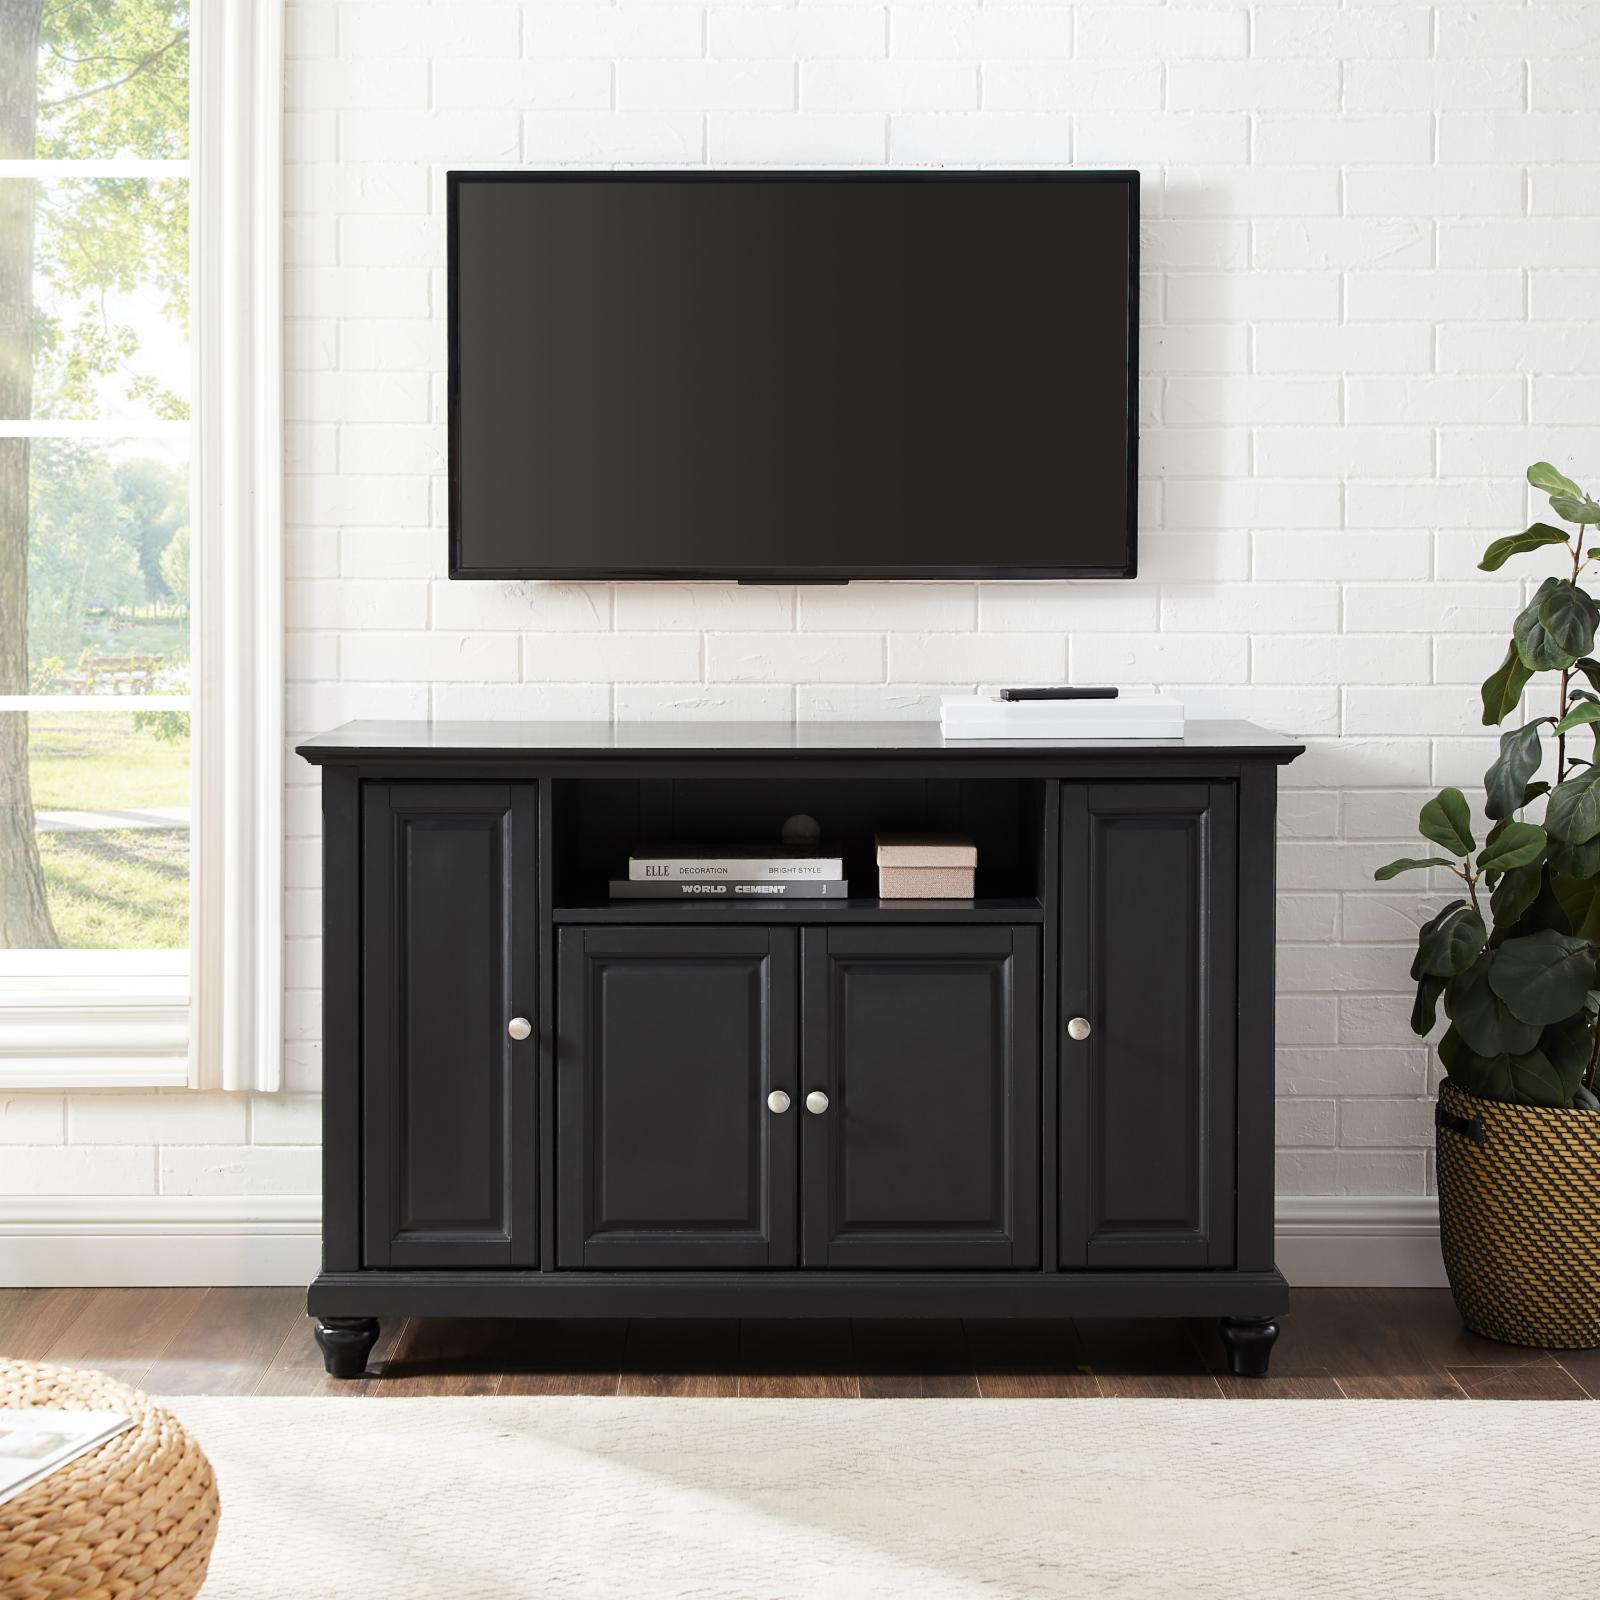 CAMBRIDGE 48" TV STAND IN BLACK FINISH - image 4 of 11